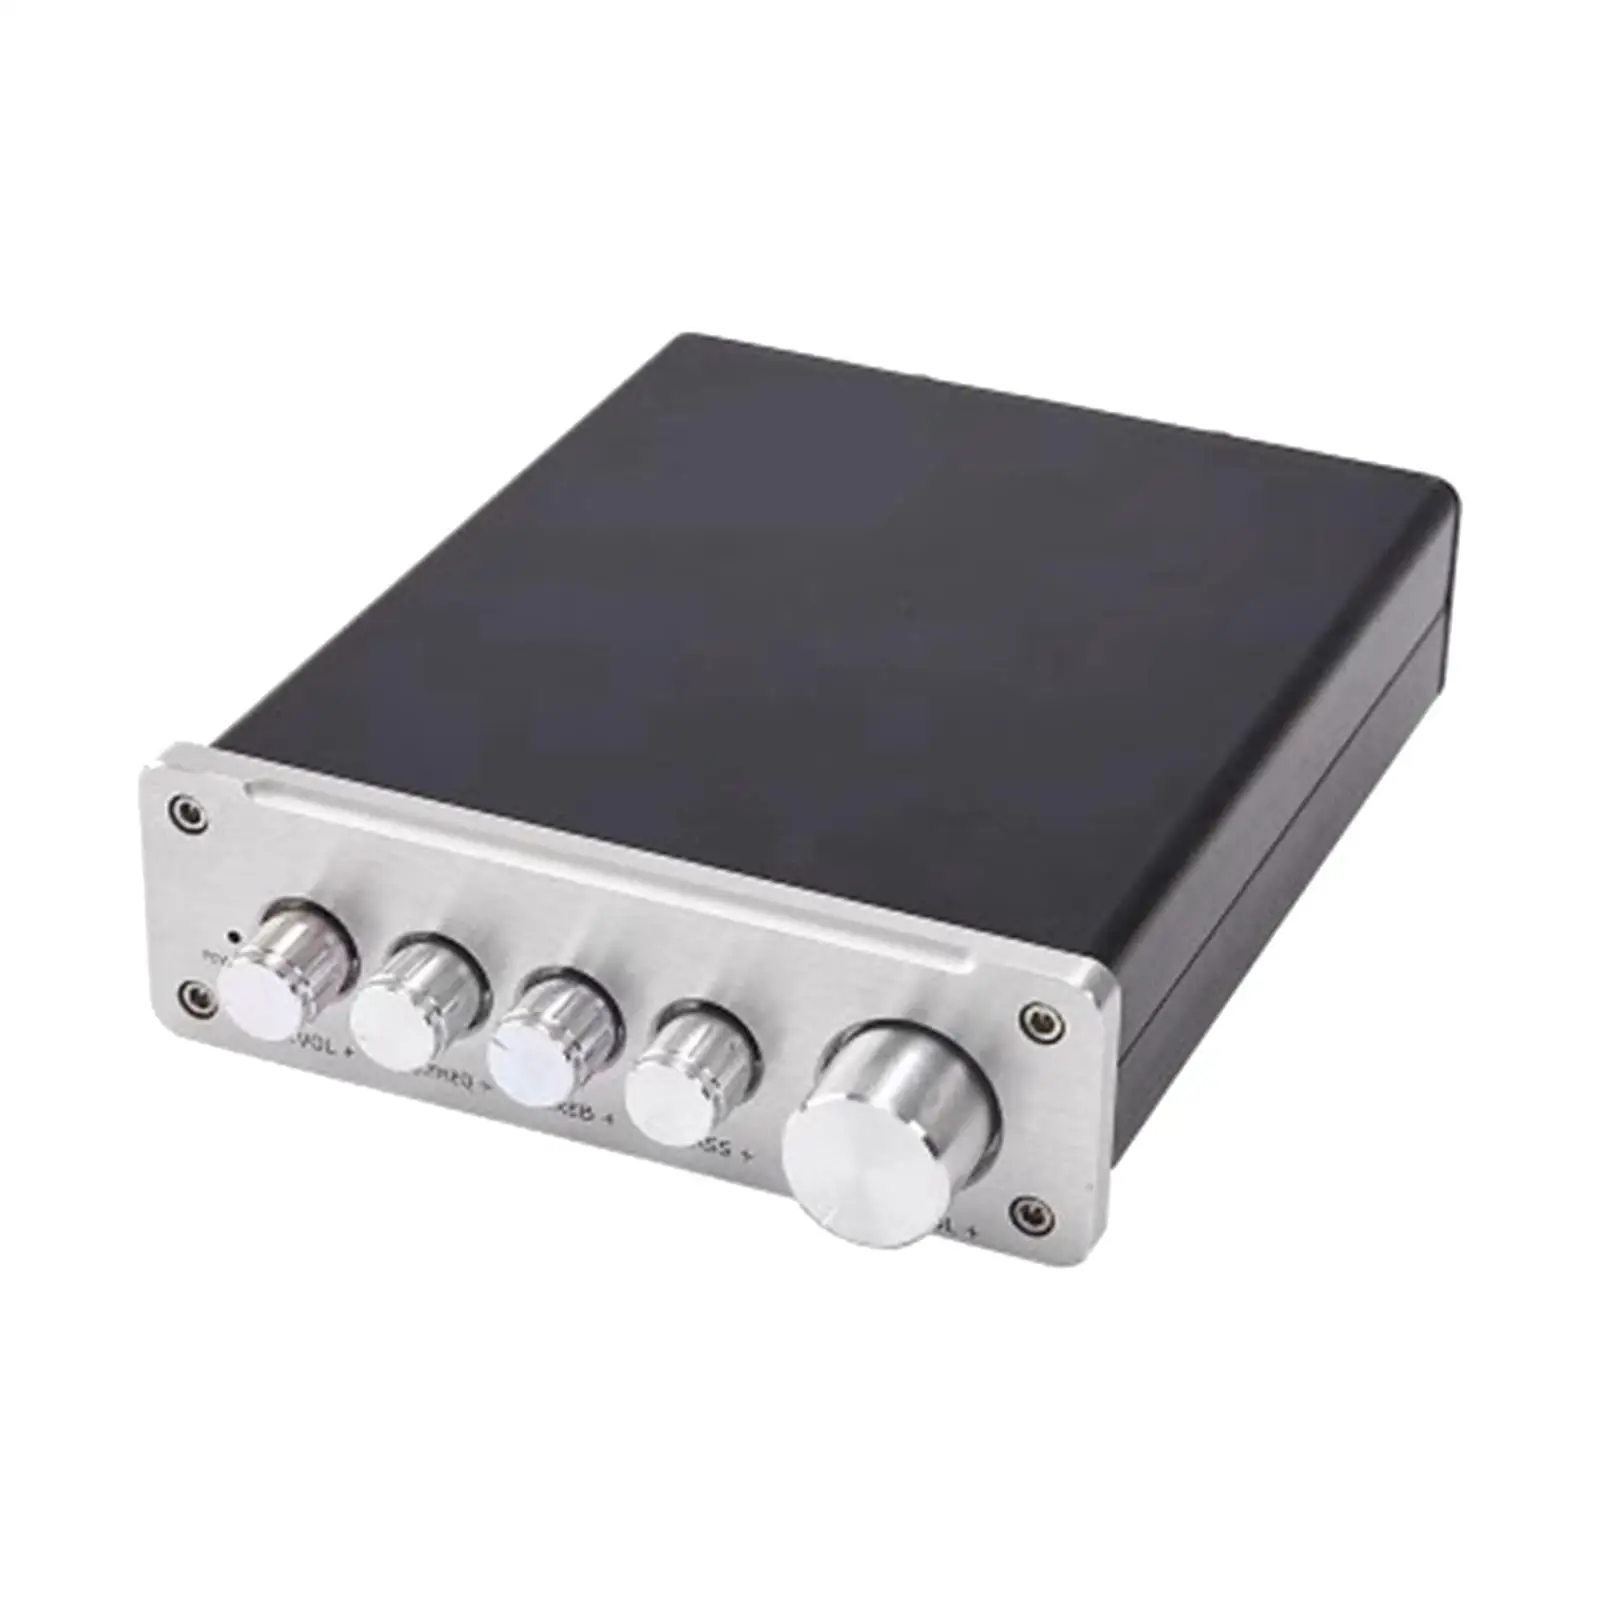 Stereo Audio Amplifier D3 5.0 2.1CH Professional Digital MP3 Player for Outdoor Performances Wedding Activities KTV Home Theater